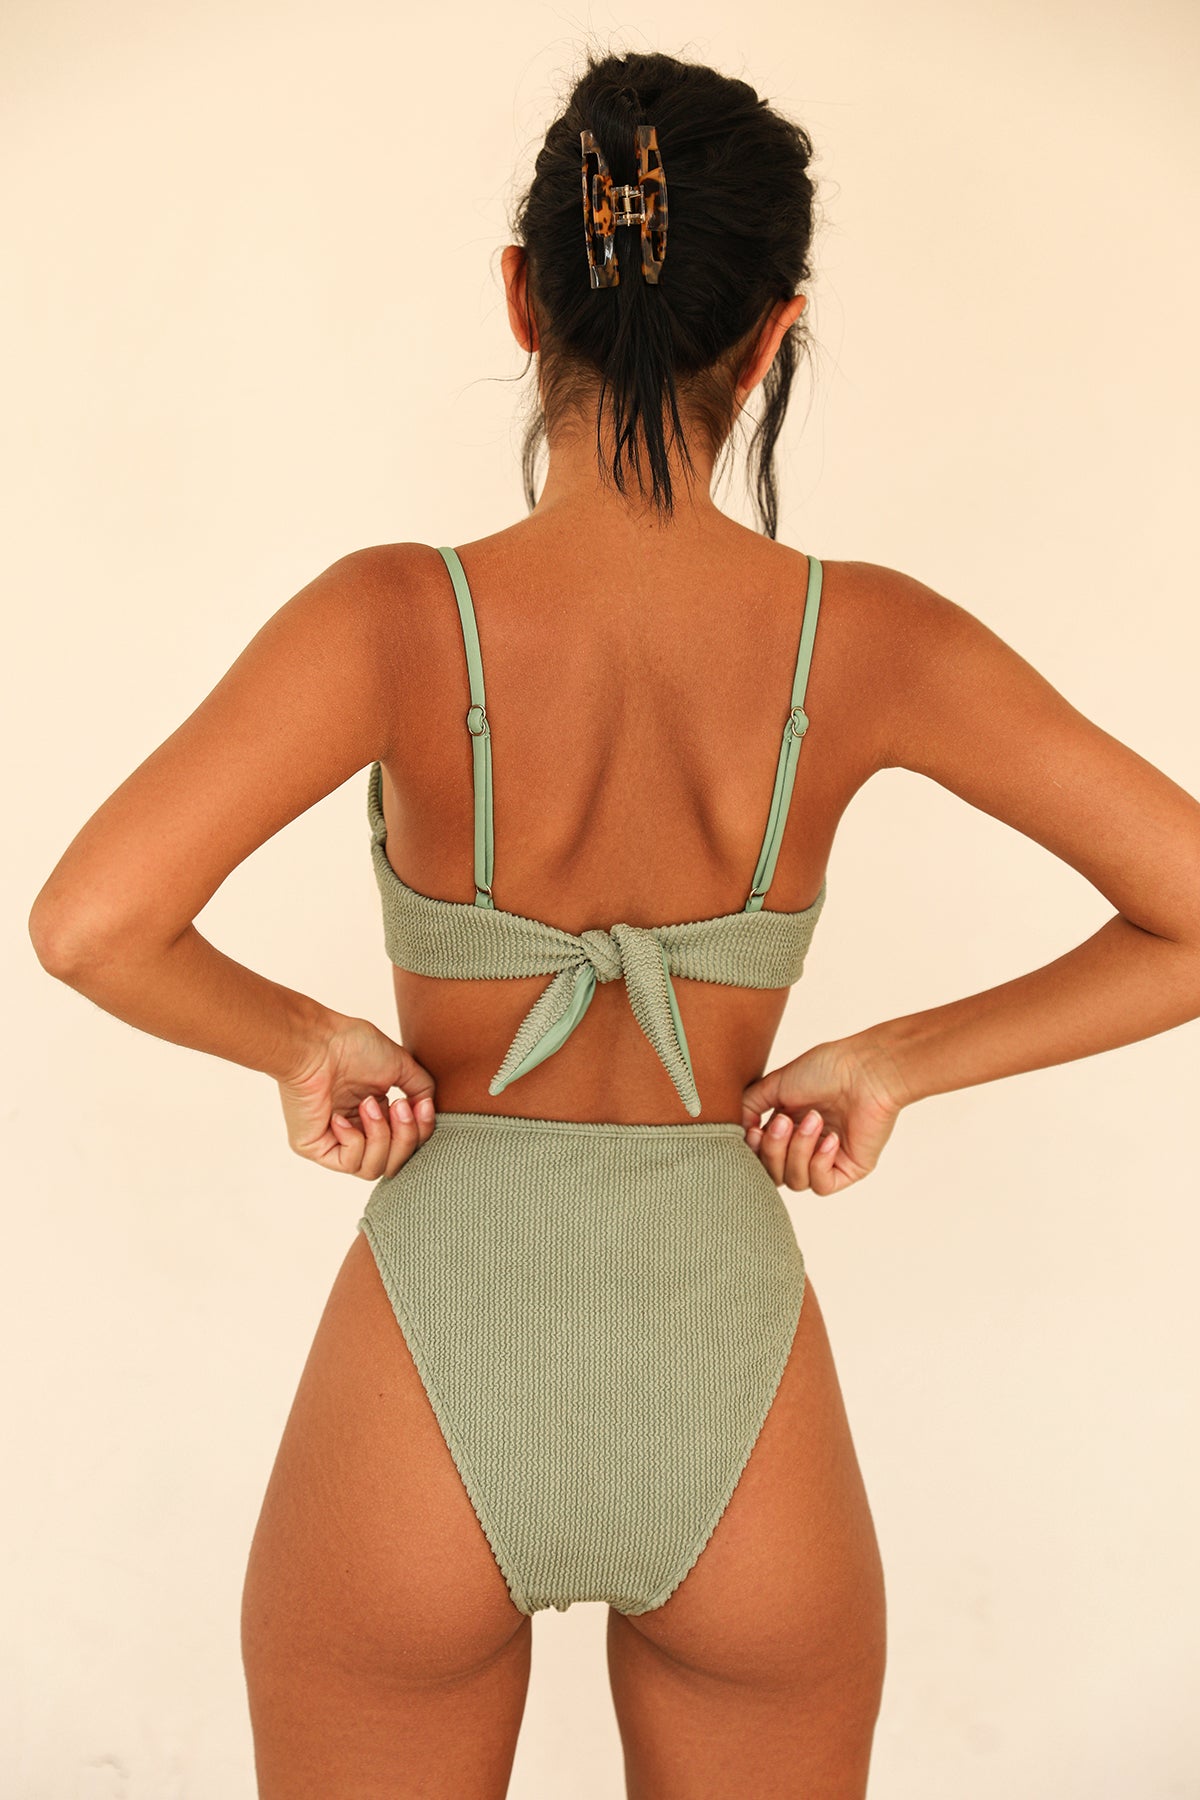 UNIKONCEPT Lifestyle Boutique and Lounge; Dippin Daisys Seashore bottom in Sage featured on a model. High-waisted sage green bikini bottoms